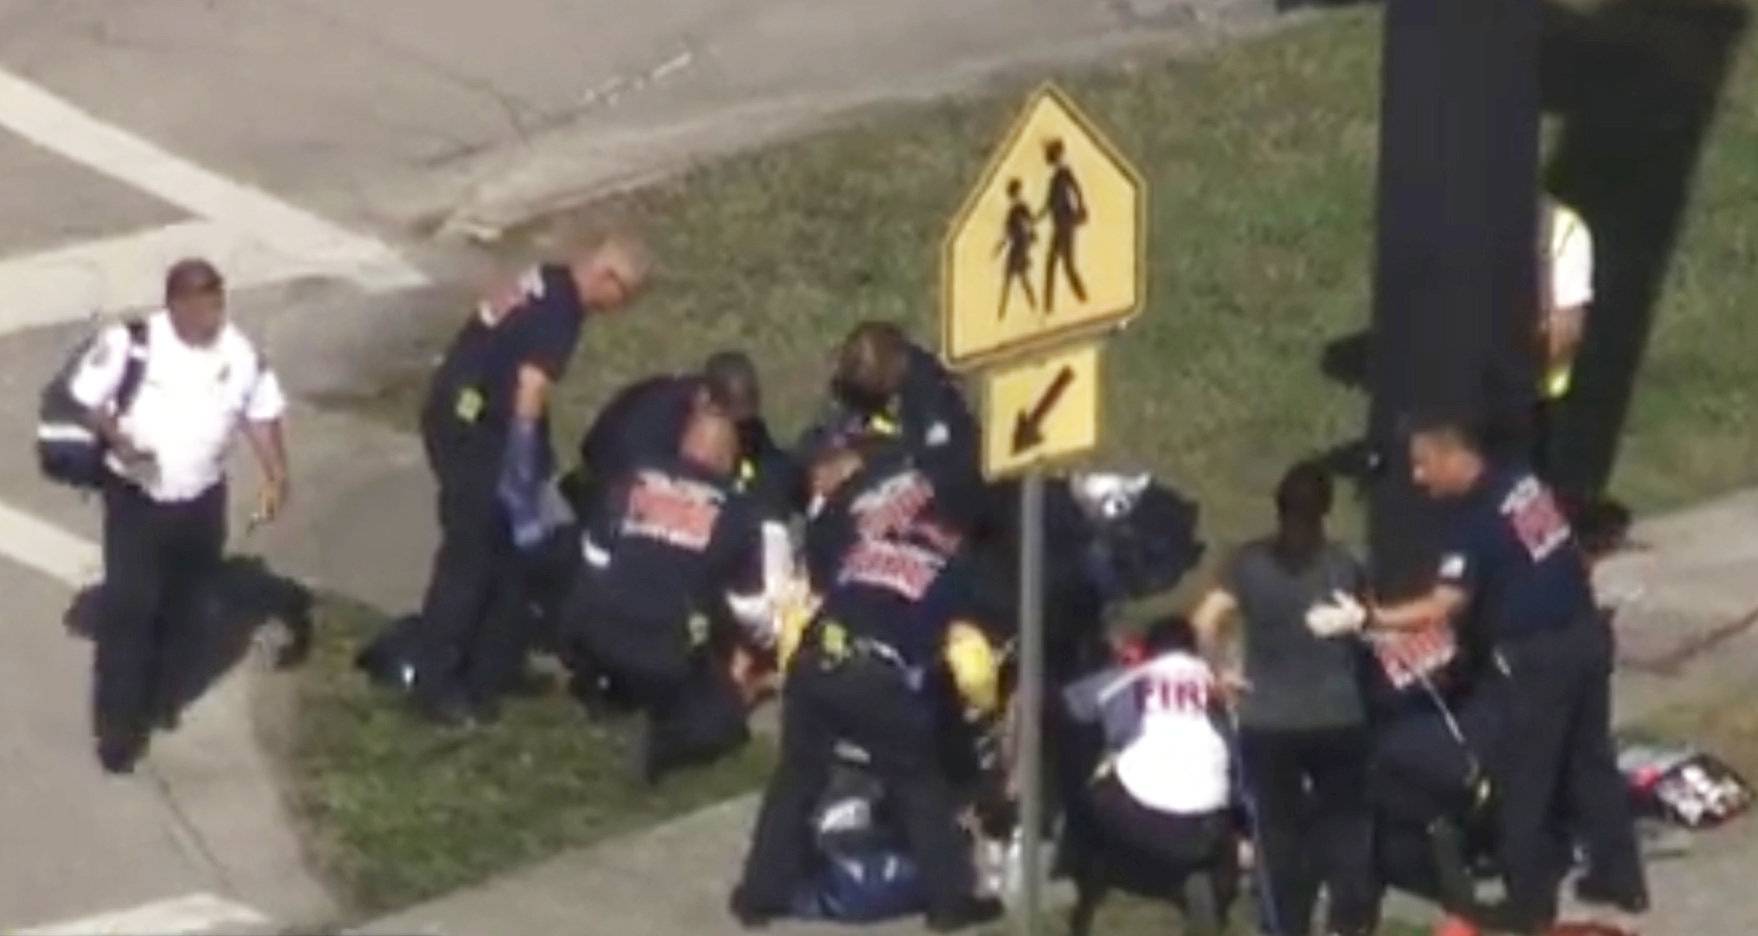 Rescue workers deal with a victim near Marjory Stoneman Douglas High School during a shooting incident in Parkland